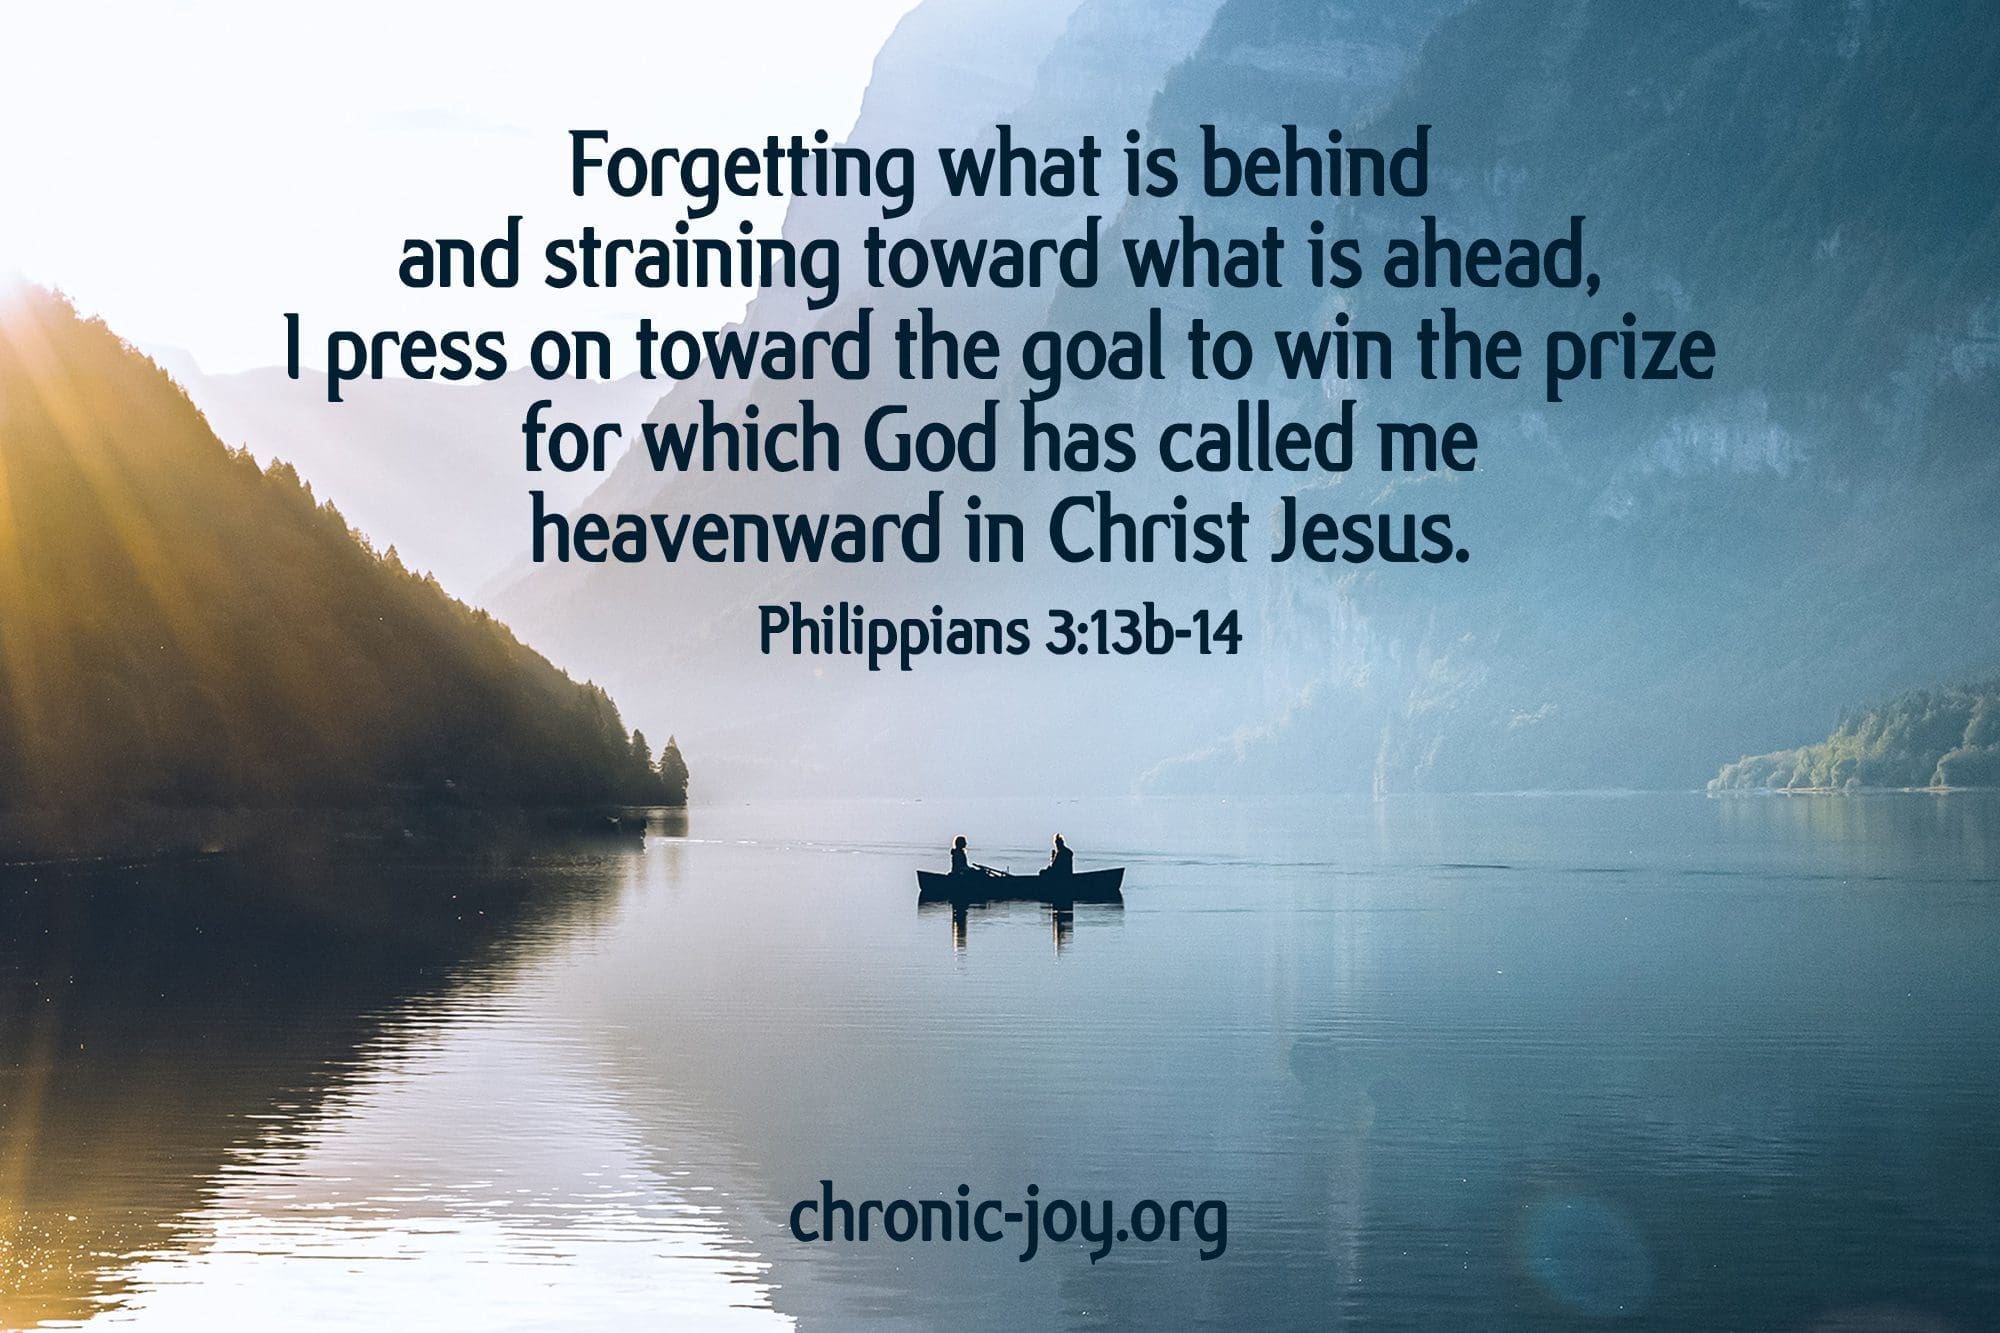 "Forgetting what is behind and straining toward what is ahead, I press on toward the goal to win the prize for which God has called me heavenward in Christ Jesus." Philippians 3:13b-14